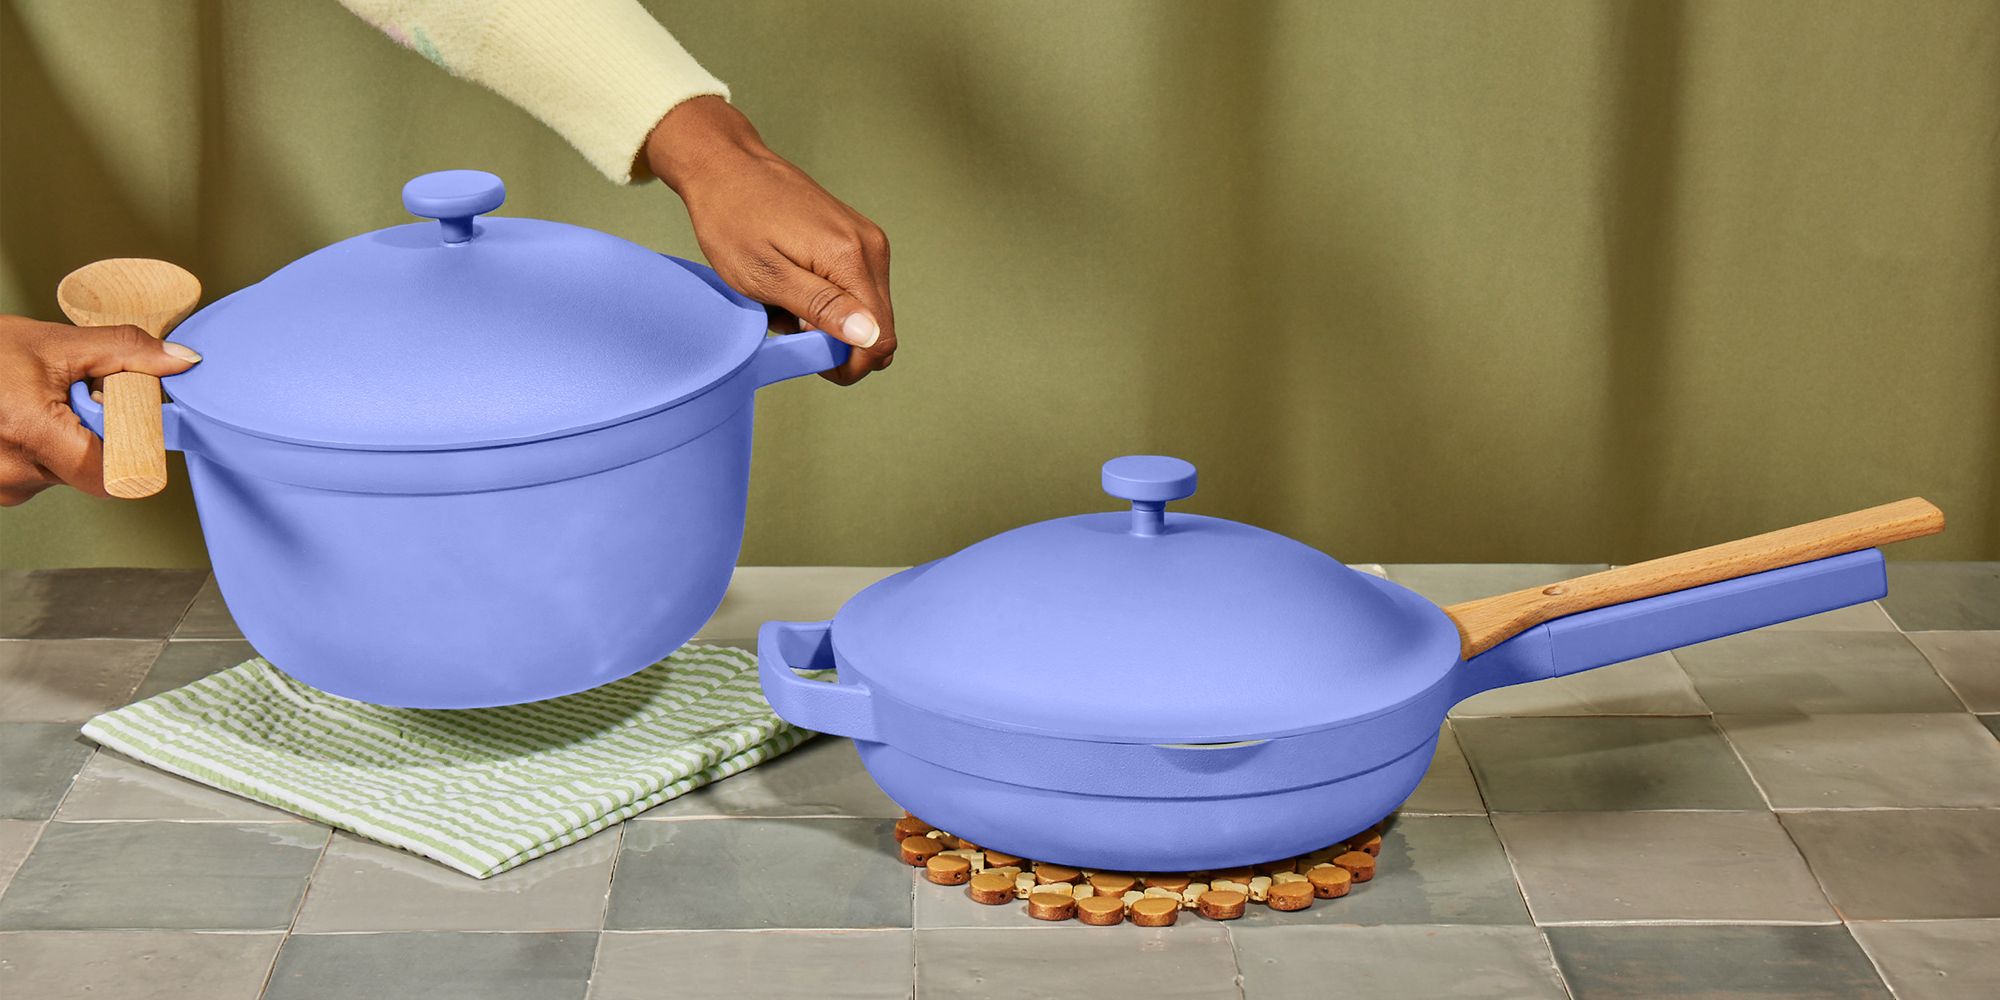 The Always Pan Now Comes in Two New Limited-Edition Colors